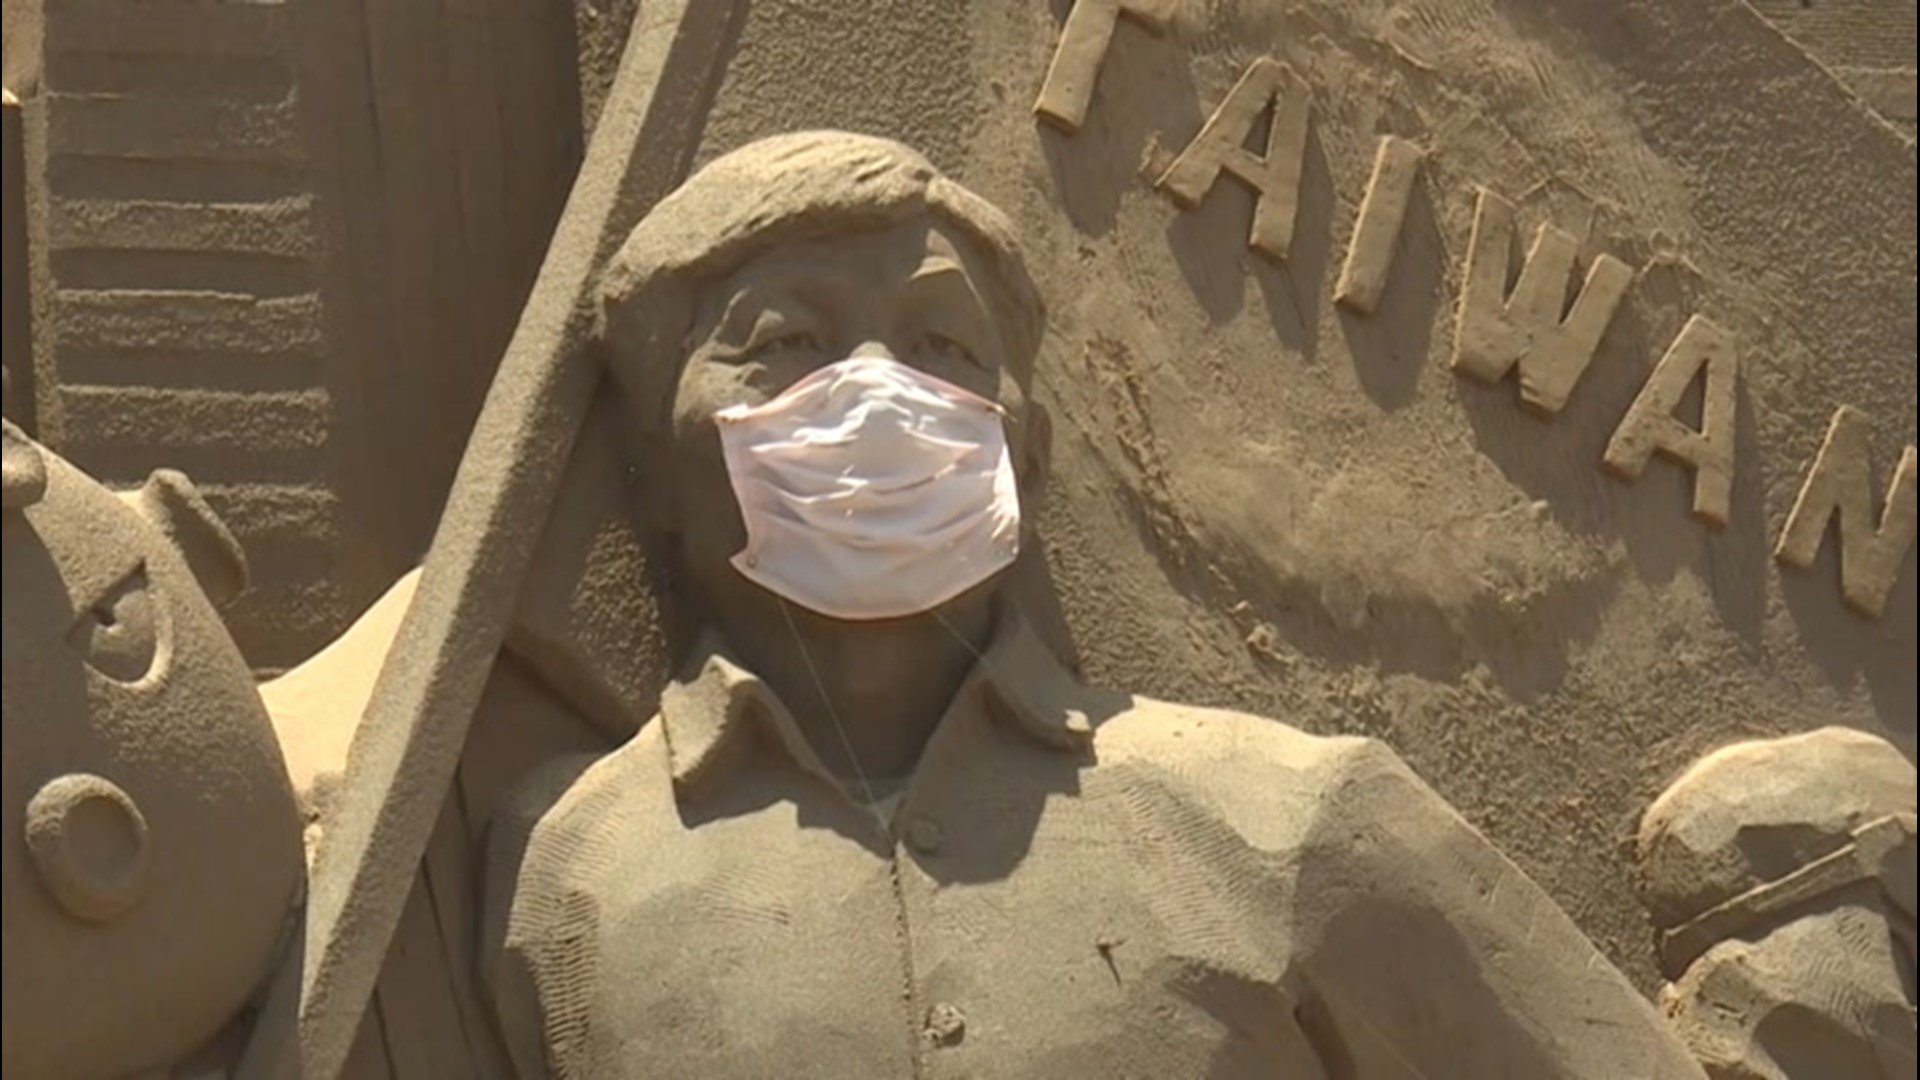 To kickstart domestic tourism, the face mask on a sand sculpture in Taipei, Taiwan, was removed on June 29 by the country's transportation and health ministers.